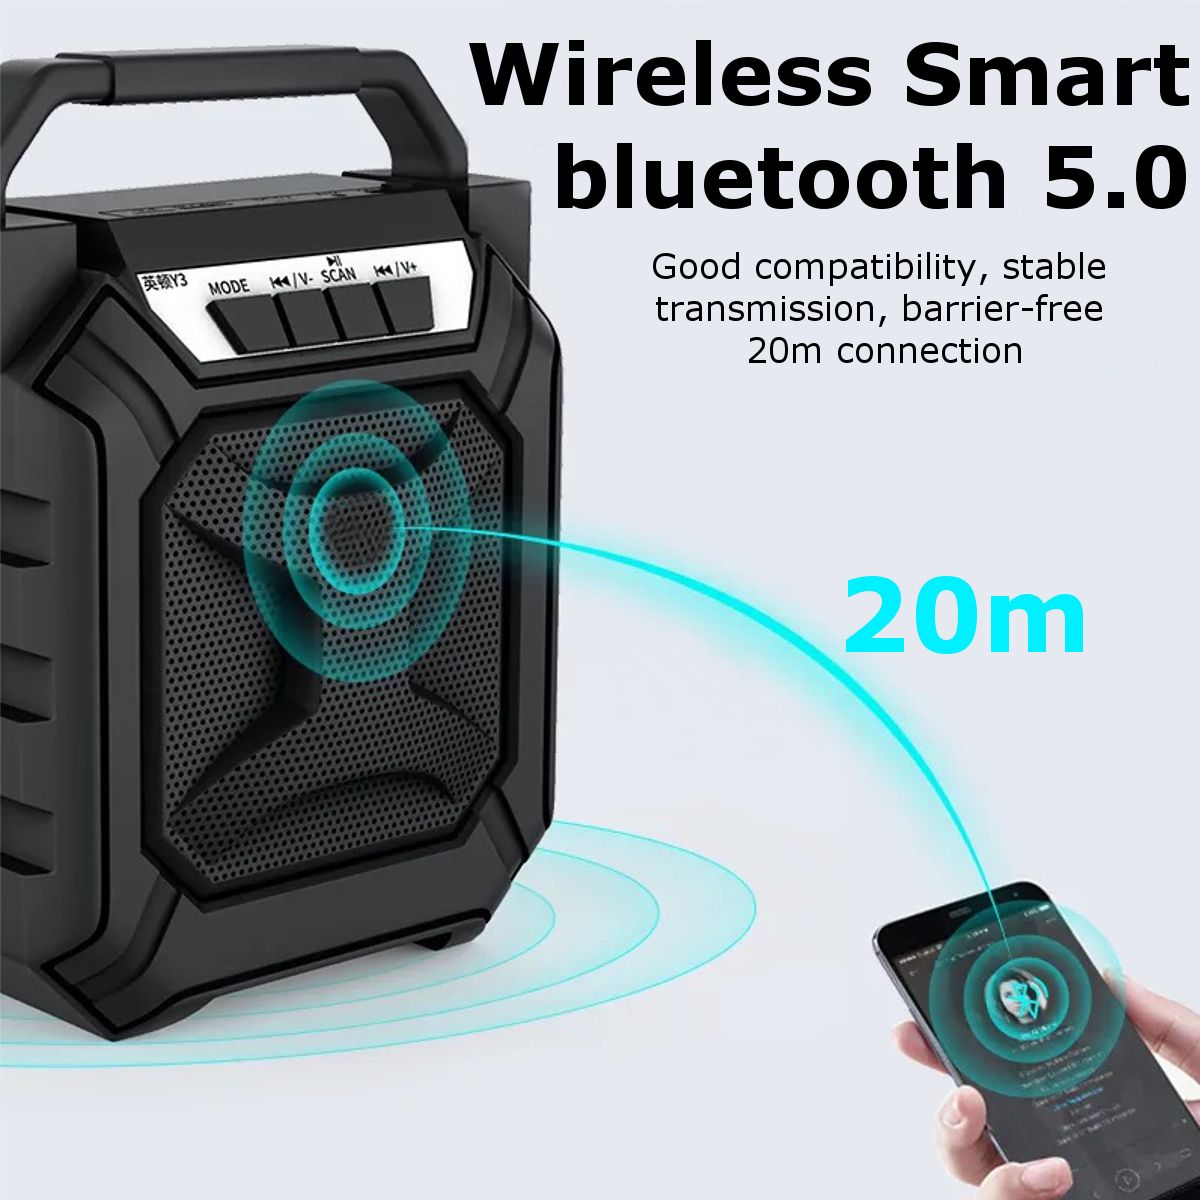 Portable-60Hz-15KHz-Bluetooth-50-Wireless-Speaker-3000mAh-Rechargeable-High-power-Subwoofer-Support--1717424